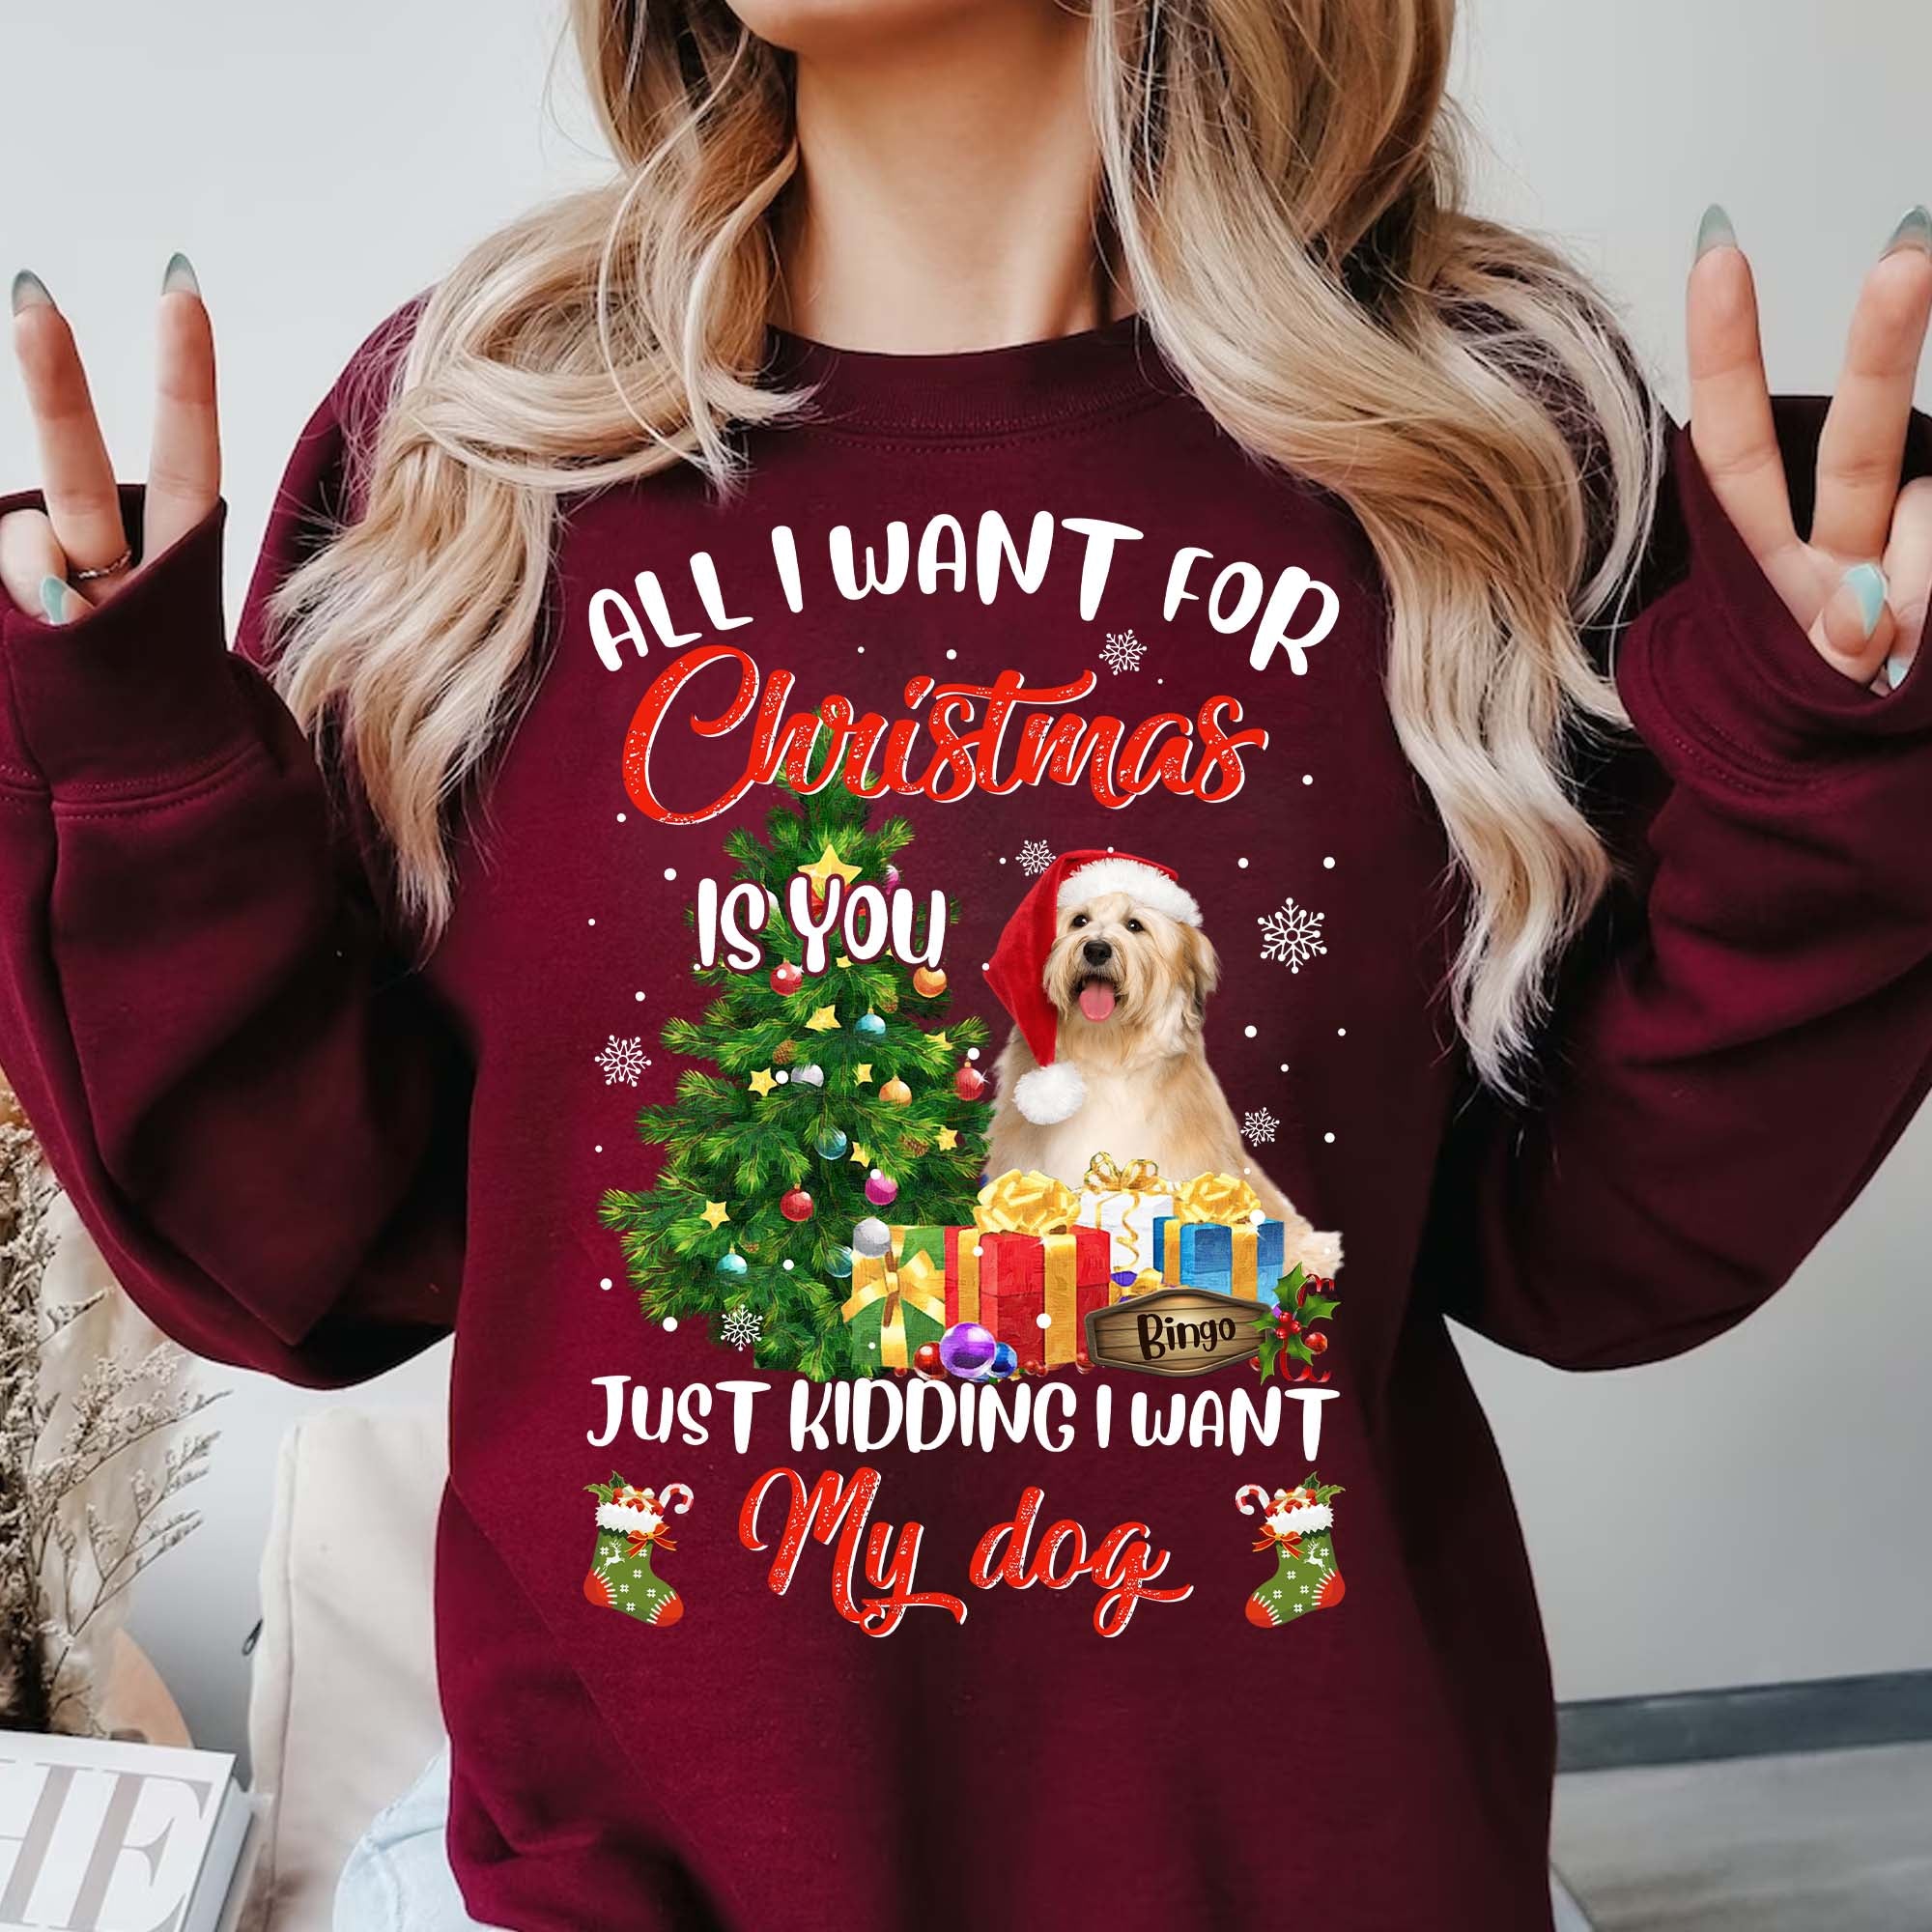 All I Want For Christmas Is You - Personalized Sweatshirt - Family Gift, Gift For Pet Lover, Xmas Gift